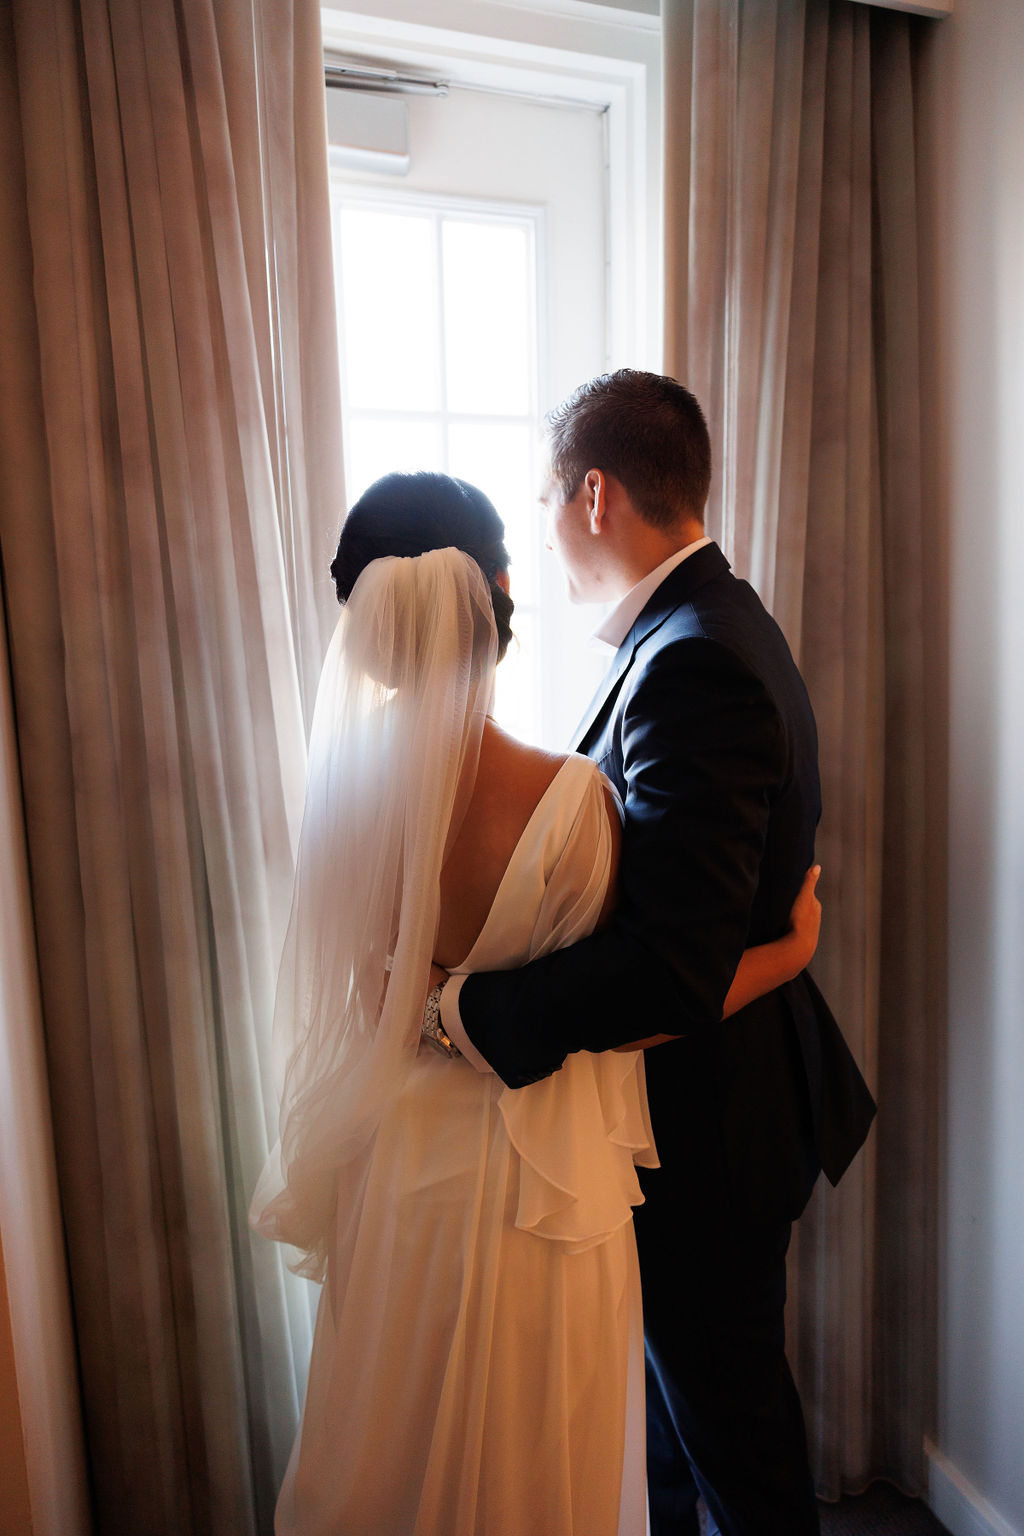 Newlyweds share a quiet moment gazing out a window of a hotel